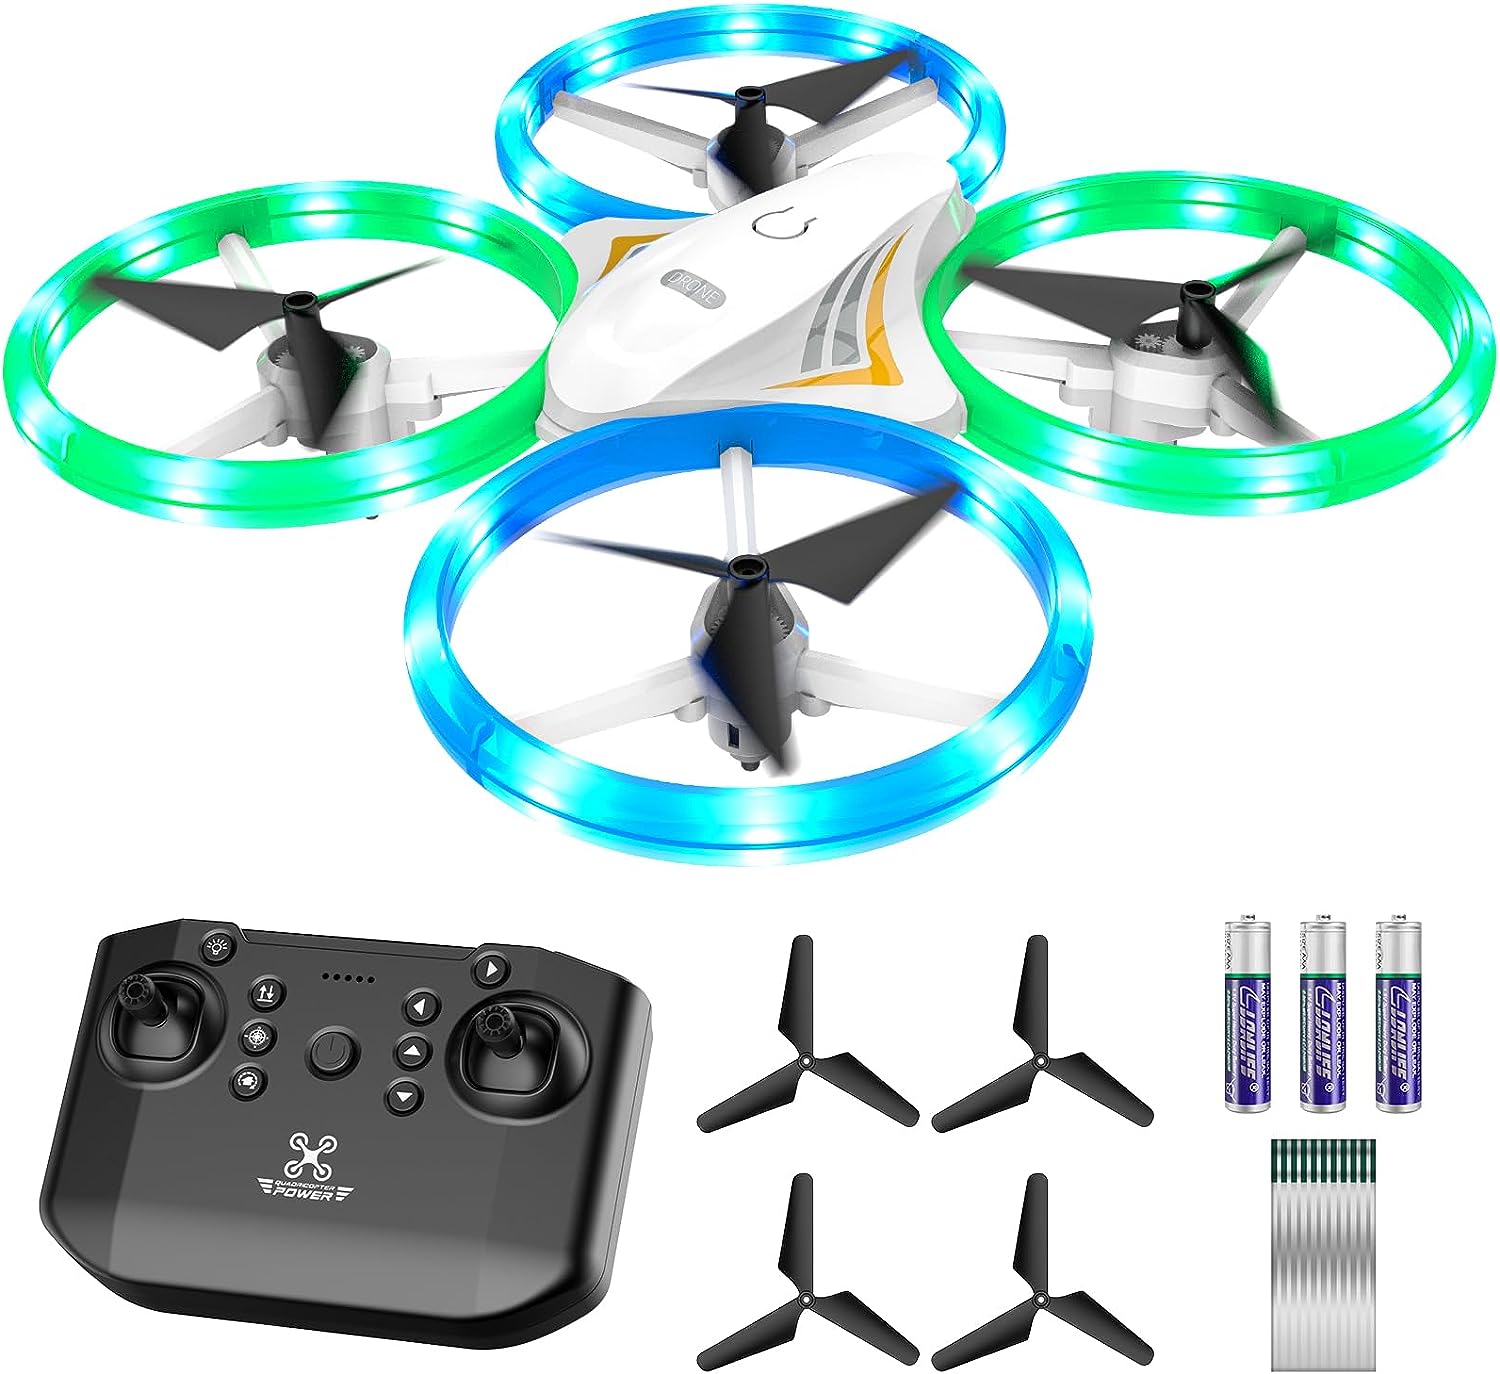 DyineeFy Mini Drone for Kids, Small Colorful Led Quadcopter with Altitude Hold, Headless Mode, 360° flip, and Auto Return Home, RC Drone Easy for Beginner Flying, Kids' Gift Toy for Boys and Girls